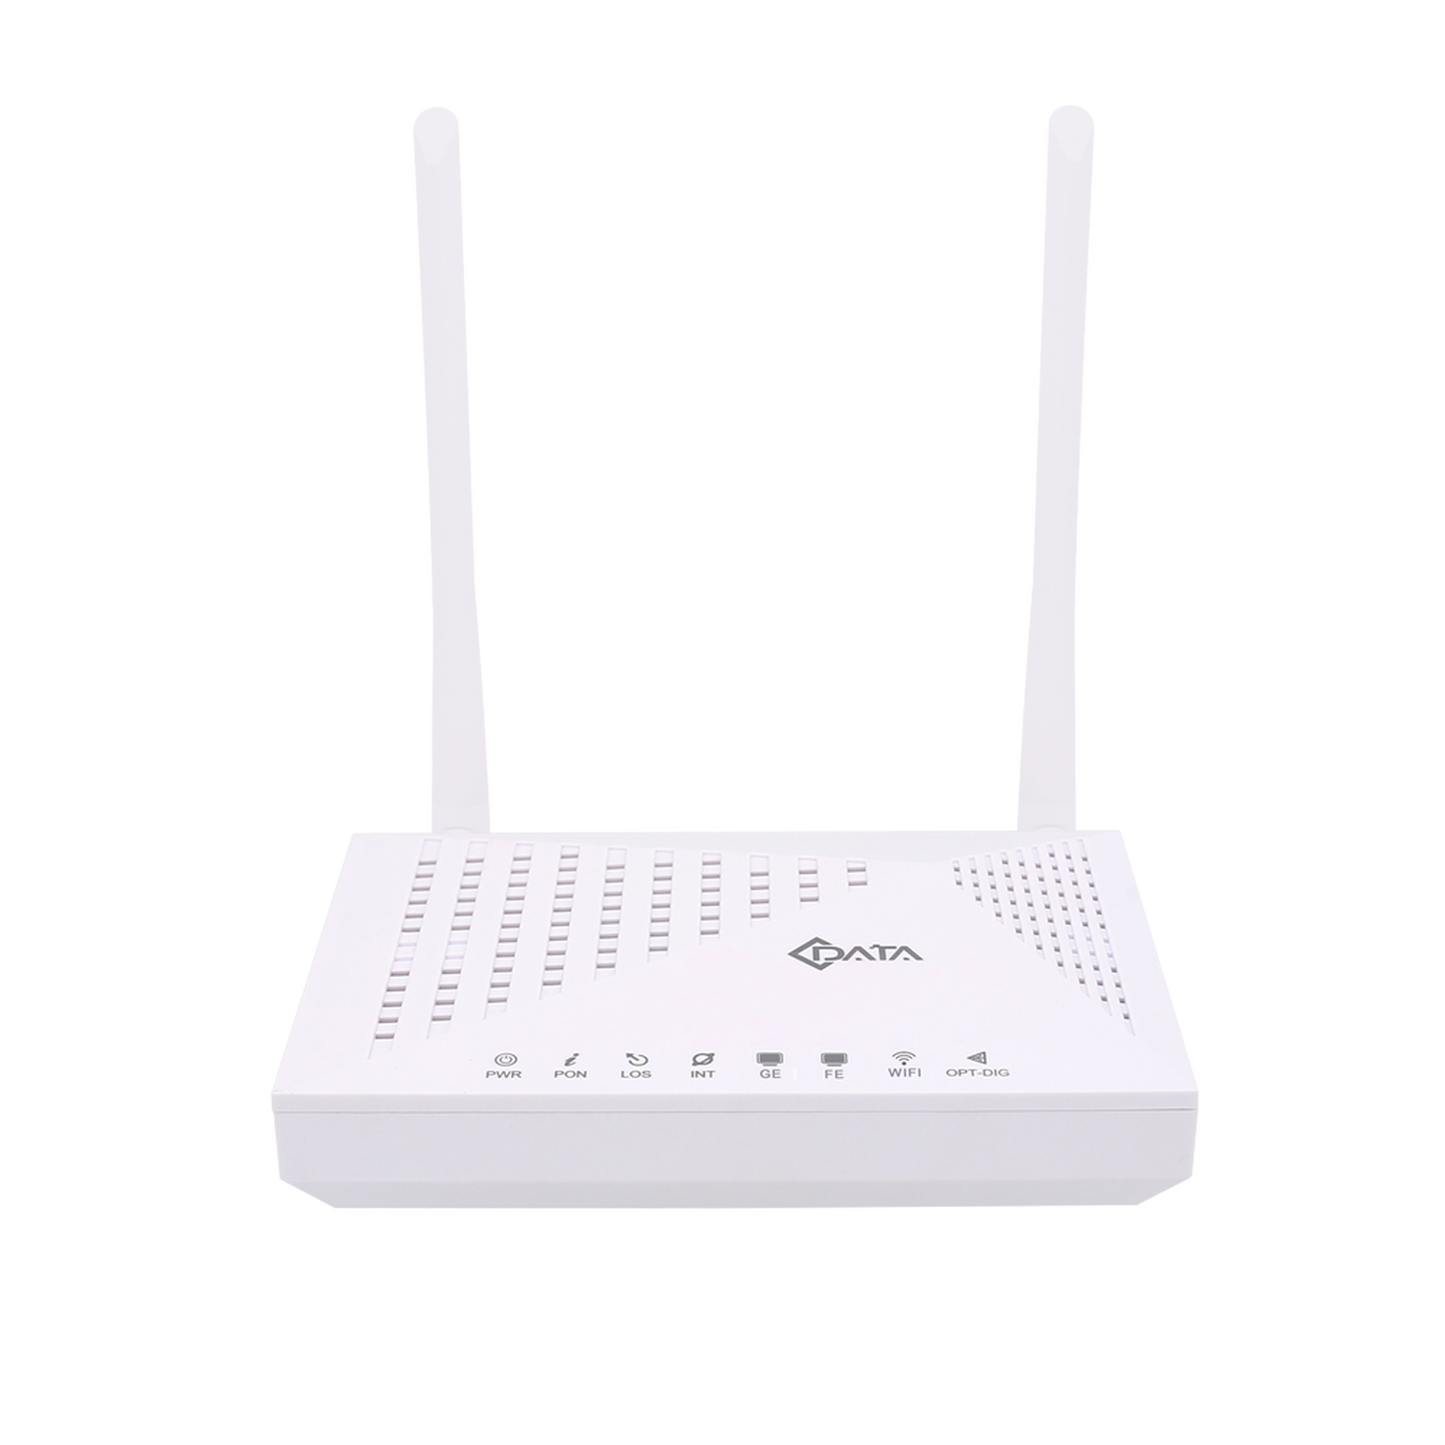 DUAL ONU G/EPON, + 1 x FE + 1 GE+ WI-FI 2.4 Ghz,  / High performance CPU, up to 300Mbps, GPON: Up to 2.488Gbps/1.244Gbps.